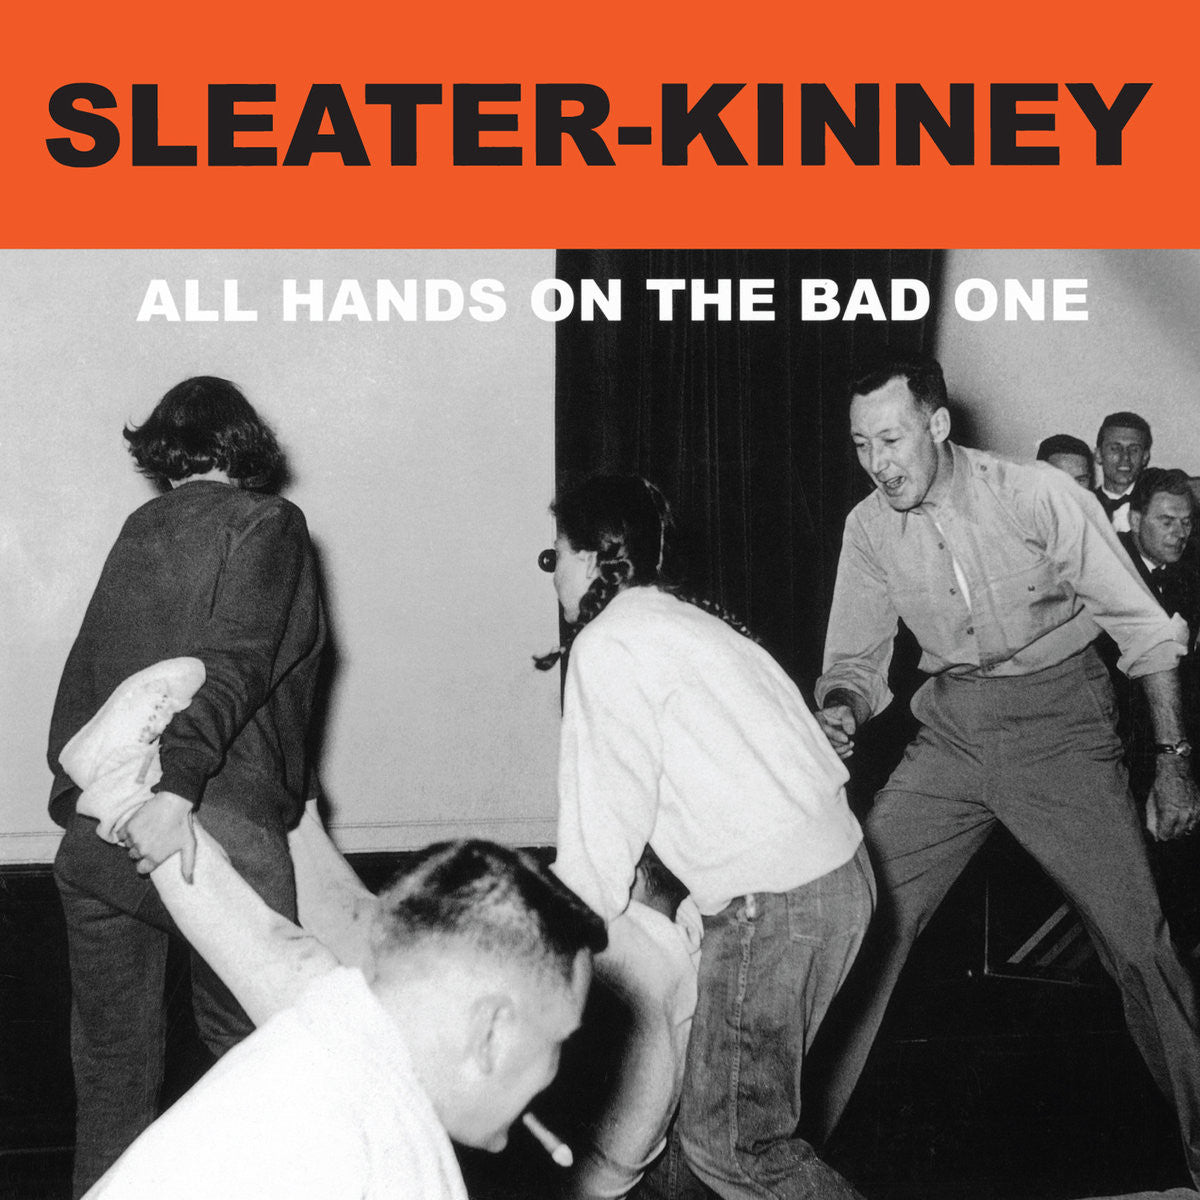 Sleater-Kinney - All Hands on The Bad One (2000) - New LP Record 2014 Sub Pop Vinyl & Download - Alternative Rock